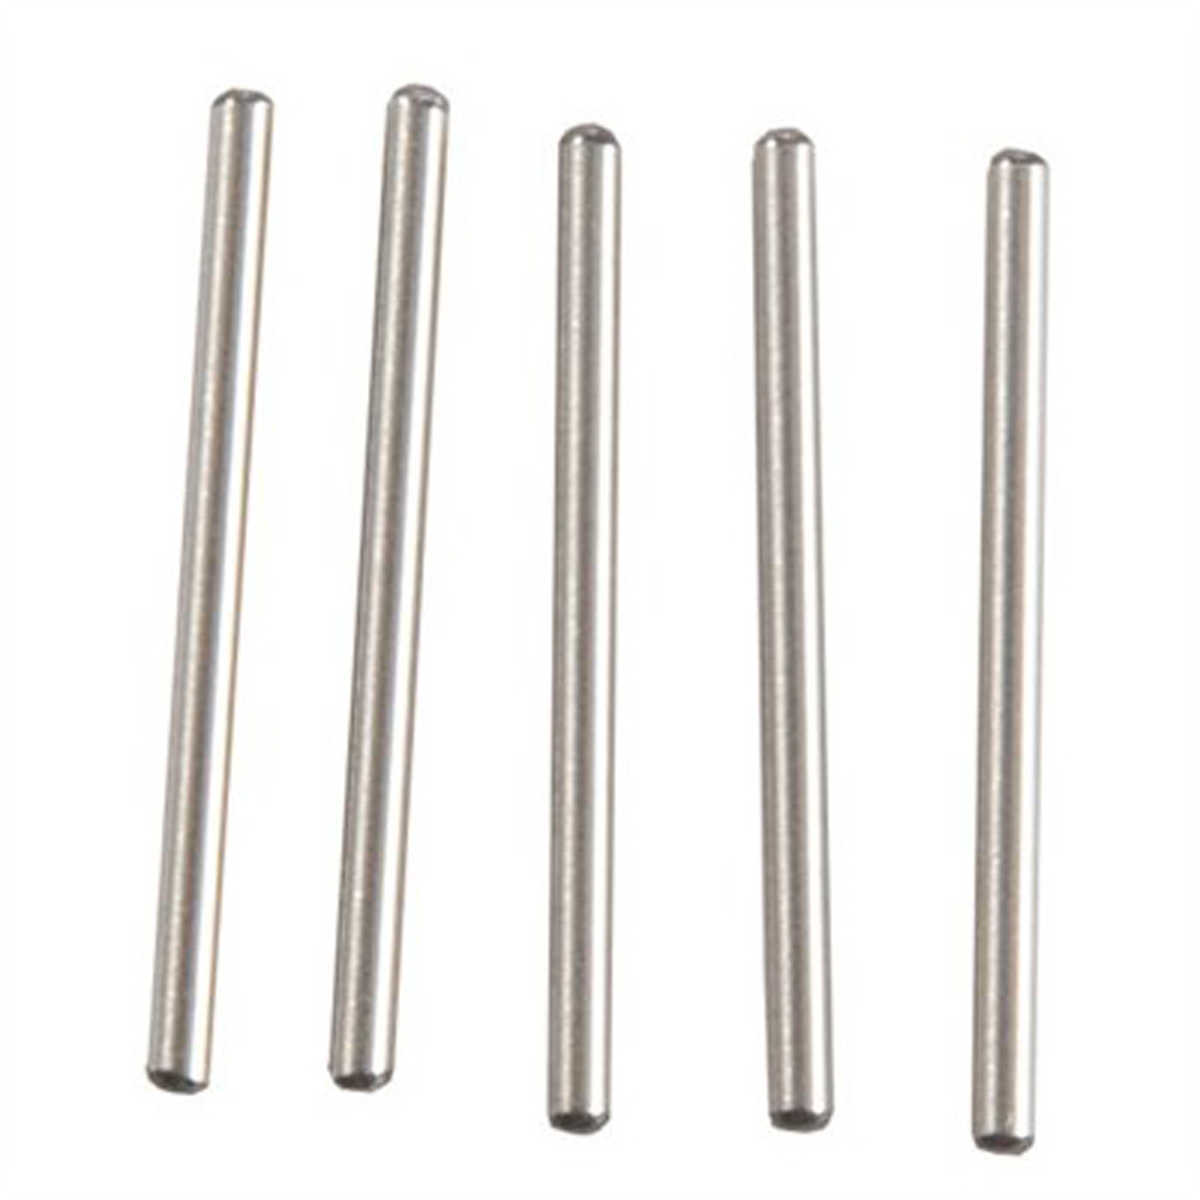 RCBS Decapping Pins (Large, 5 Count)